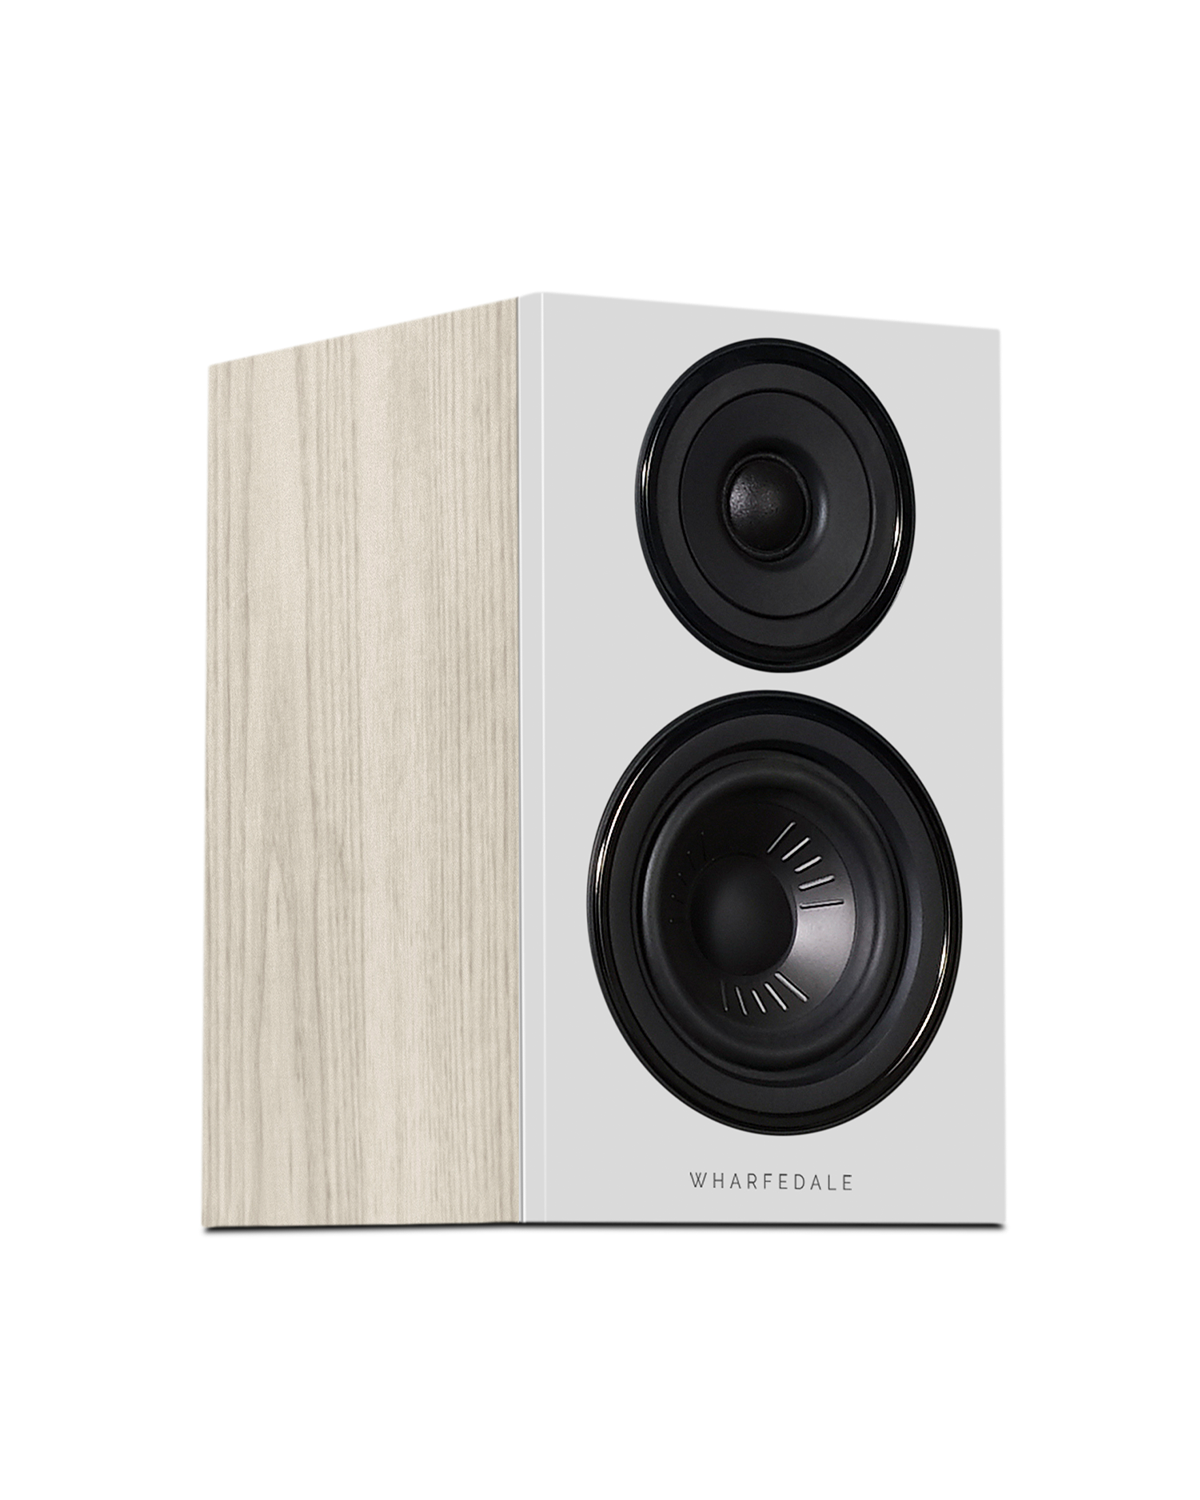 The ultra-compact speaker in the DIAMOND 12 series, the DIAMOND 12.0 features all of the same technology as its larger siblings but is designed for small-footprint hi-fi systems, or even as a high-performance, compact satellite speaker in home theatre systems. 